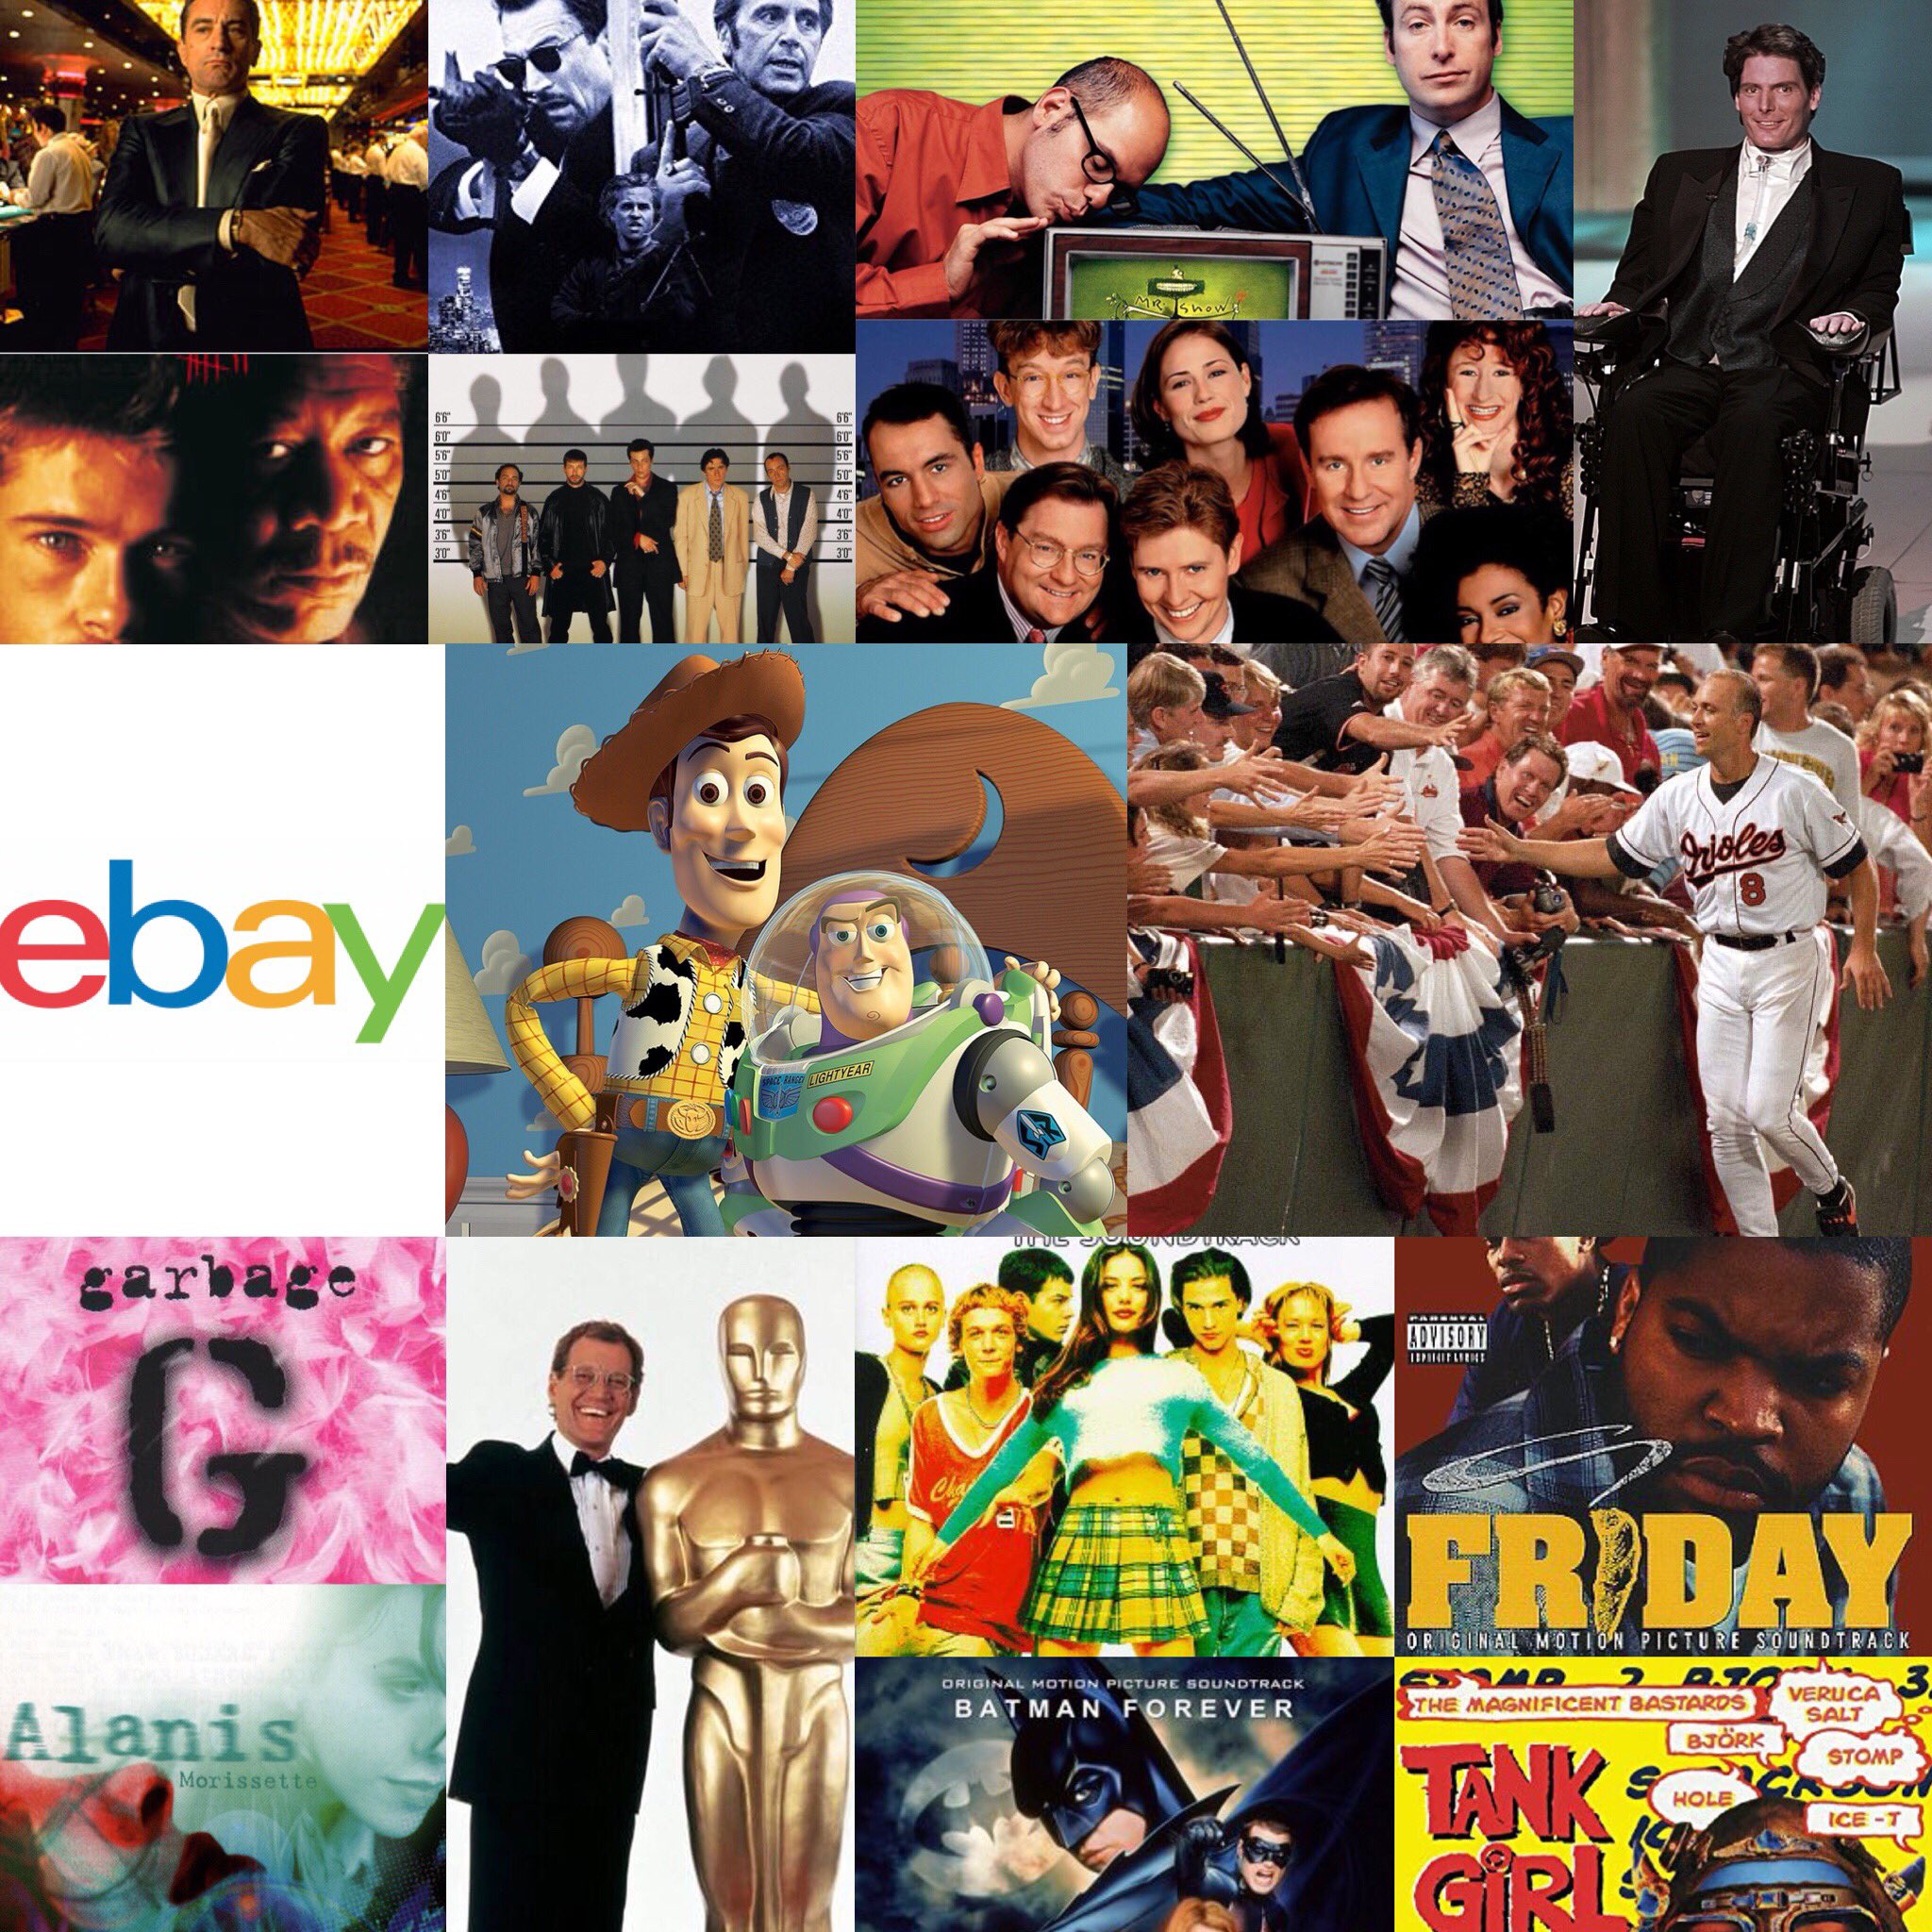 Pop Culture Time Capsule on "This week's show covered #PopCulture events of 1995. Here's Jamison @JamisonRabbitt's list: #Bullets become # Wizards, #Superman paralyzed, #Letterman hosts #Oscars, #JaggedLittlePill #Garbage, #Soundtracks, #MrShow ...